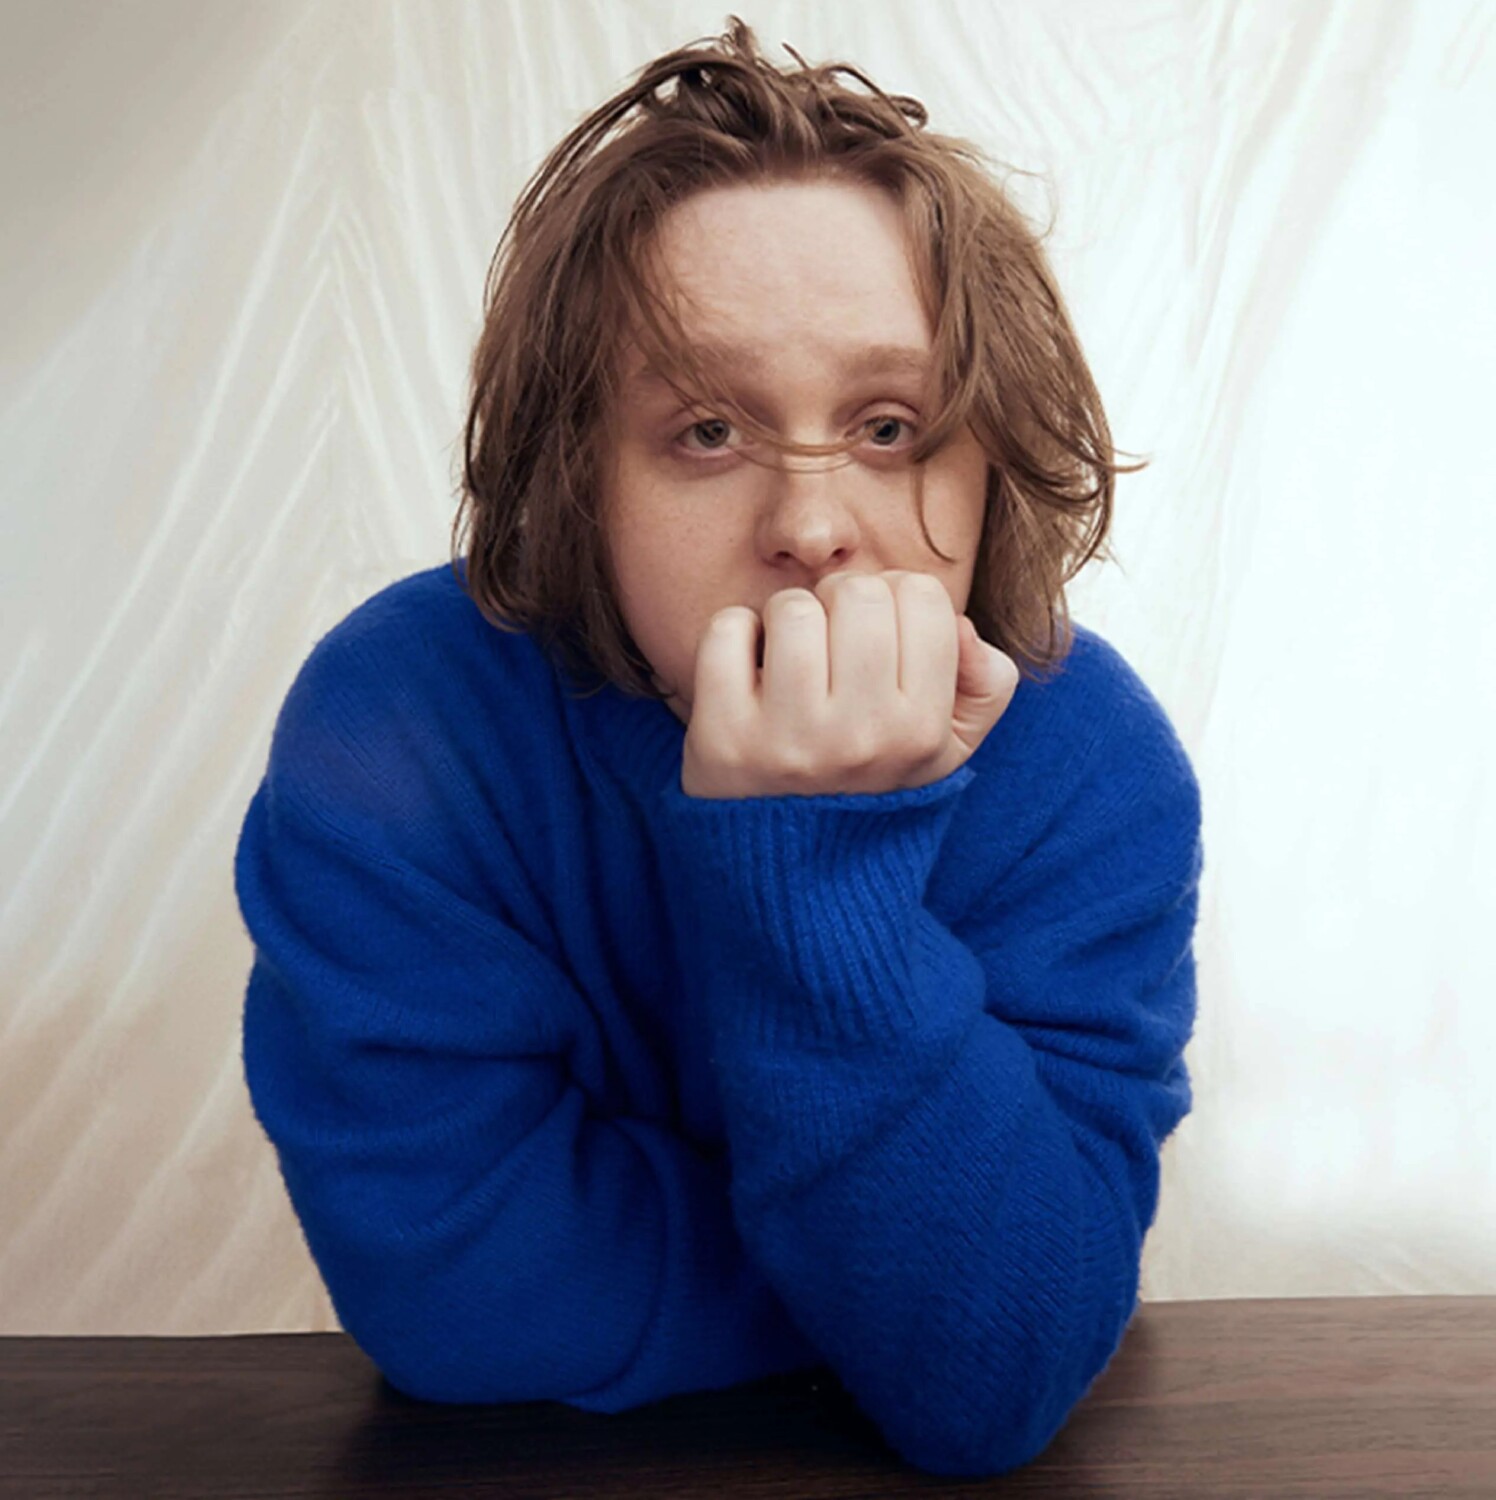 Lewis Capaldi Unveils Music Video for New Single “Pointless” Watch It